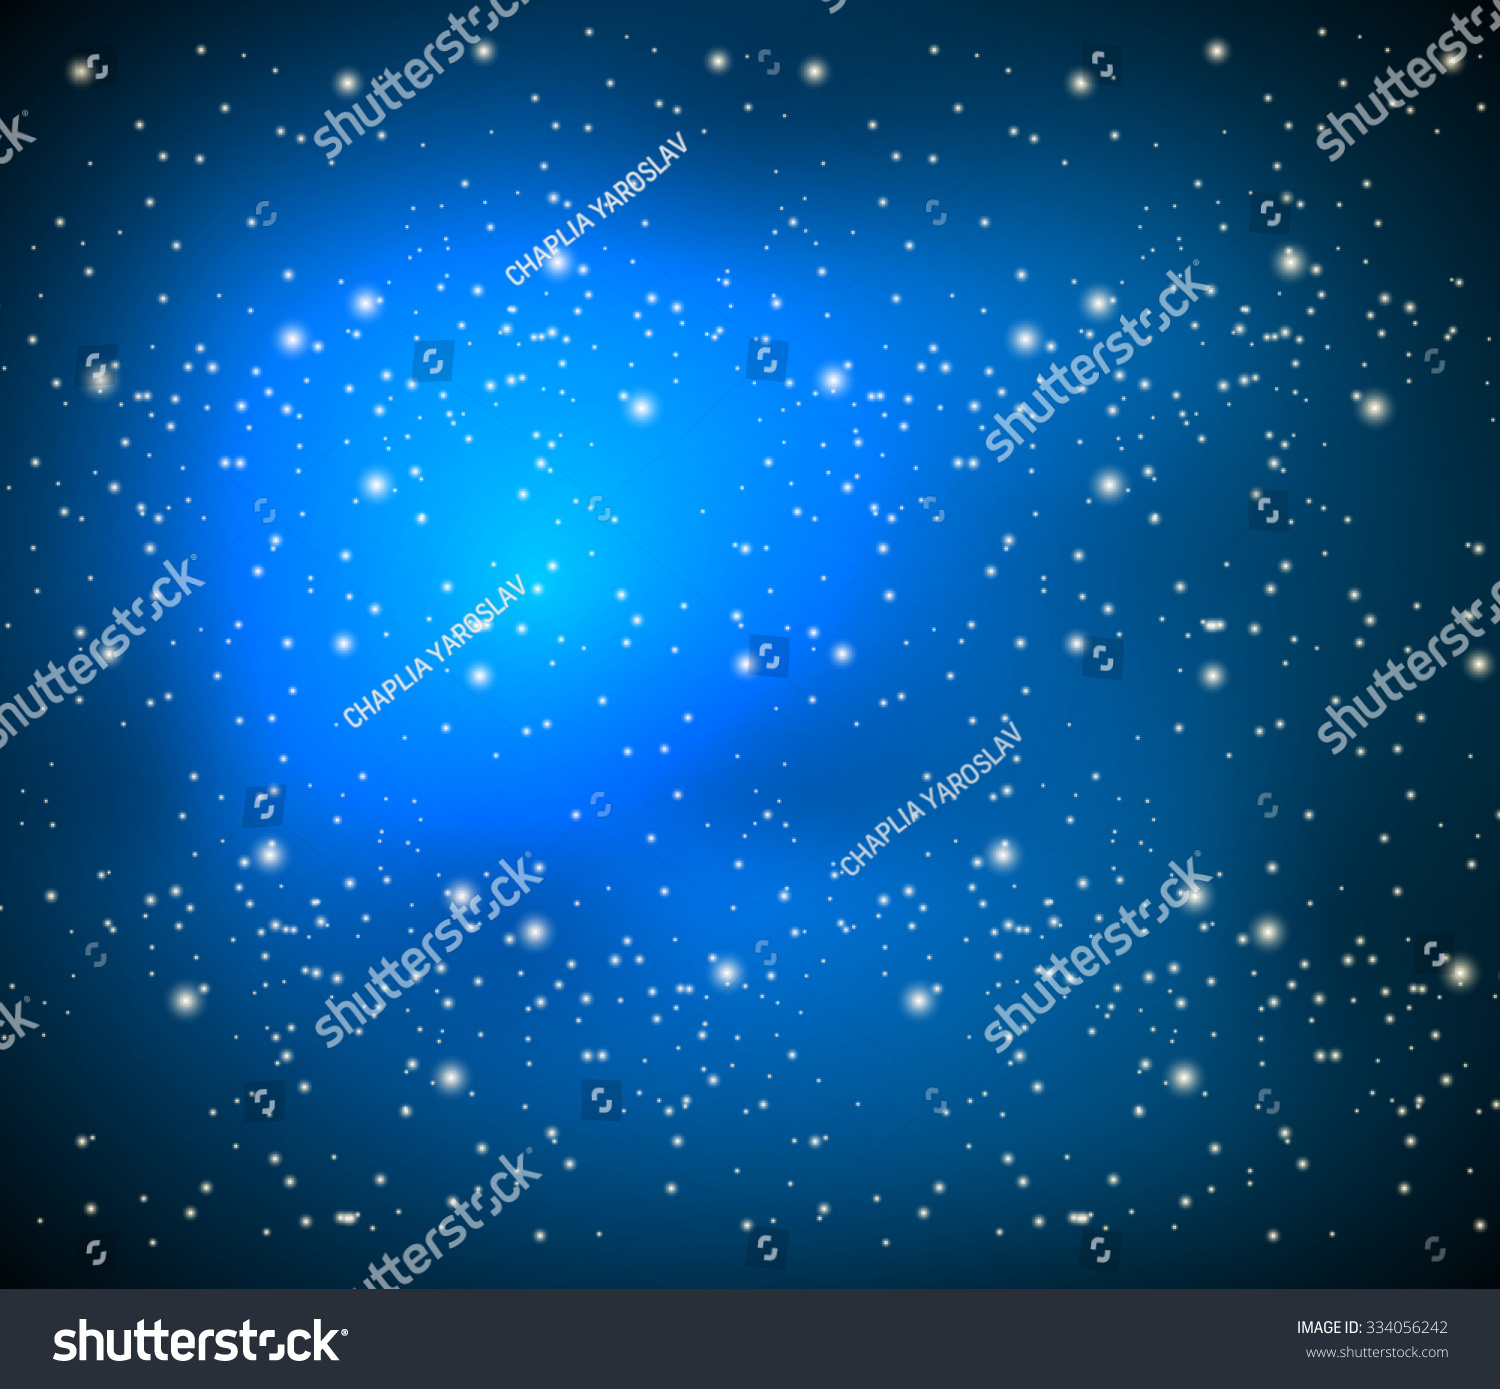 Blue Background With Bright Stars Stock Vector Illustration 334056242 ...